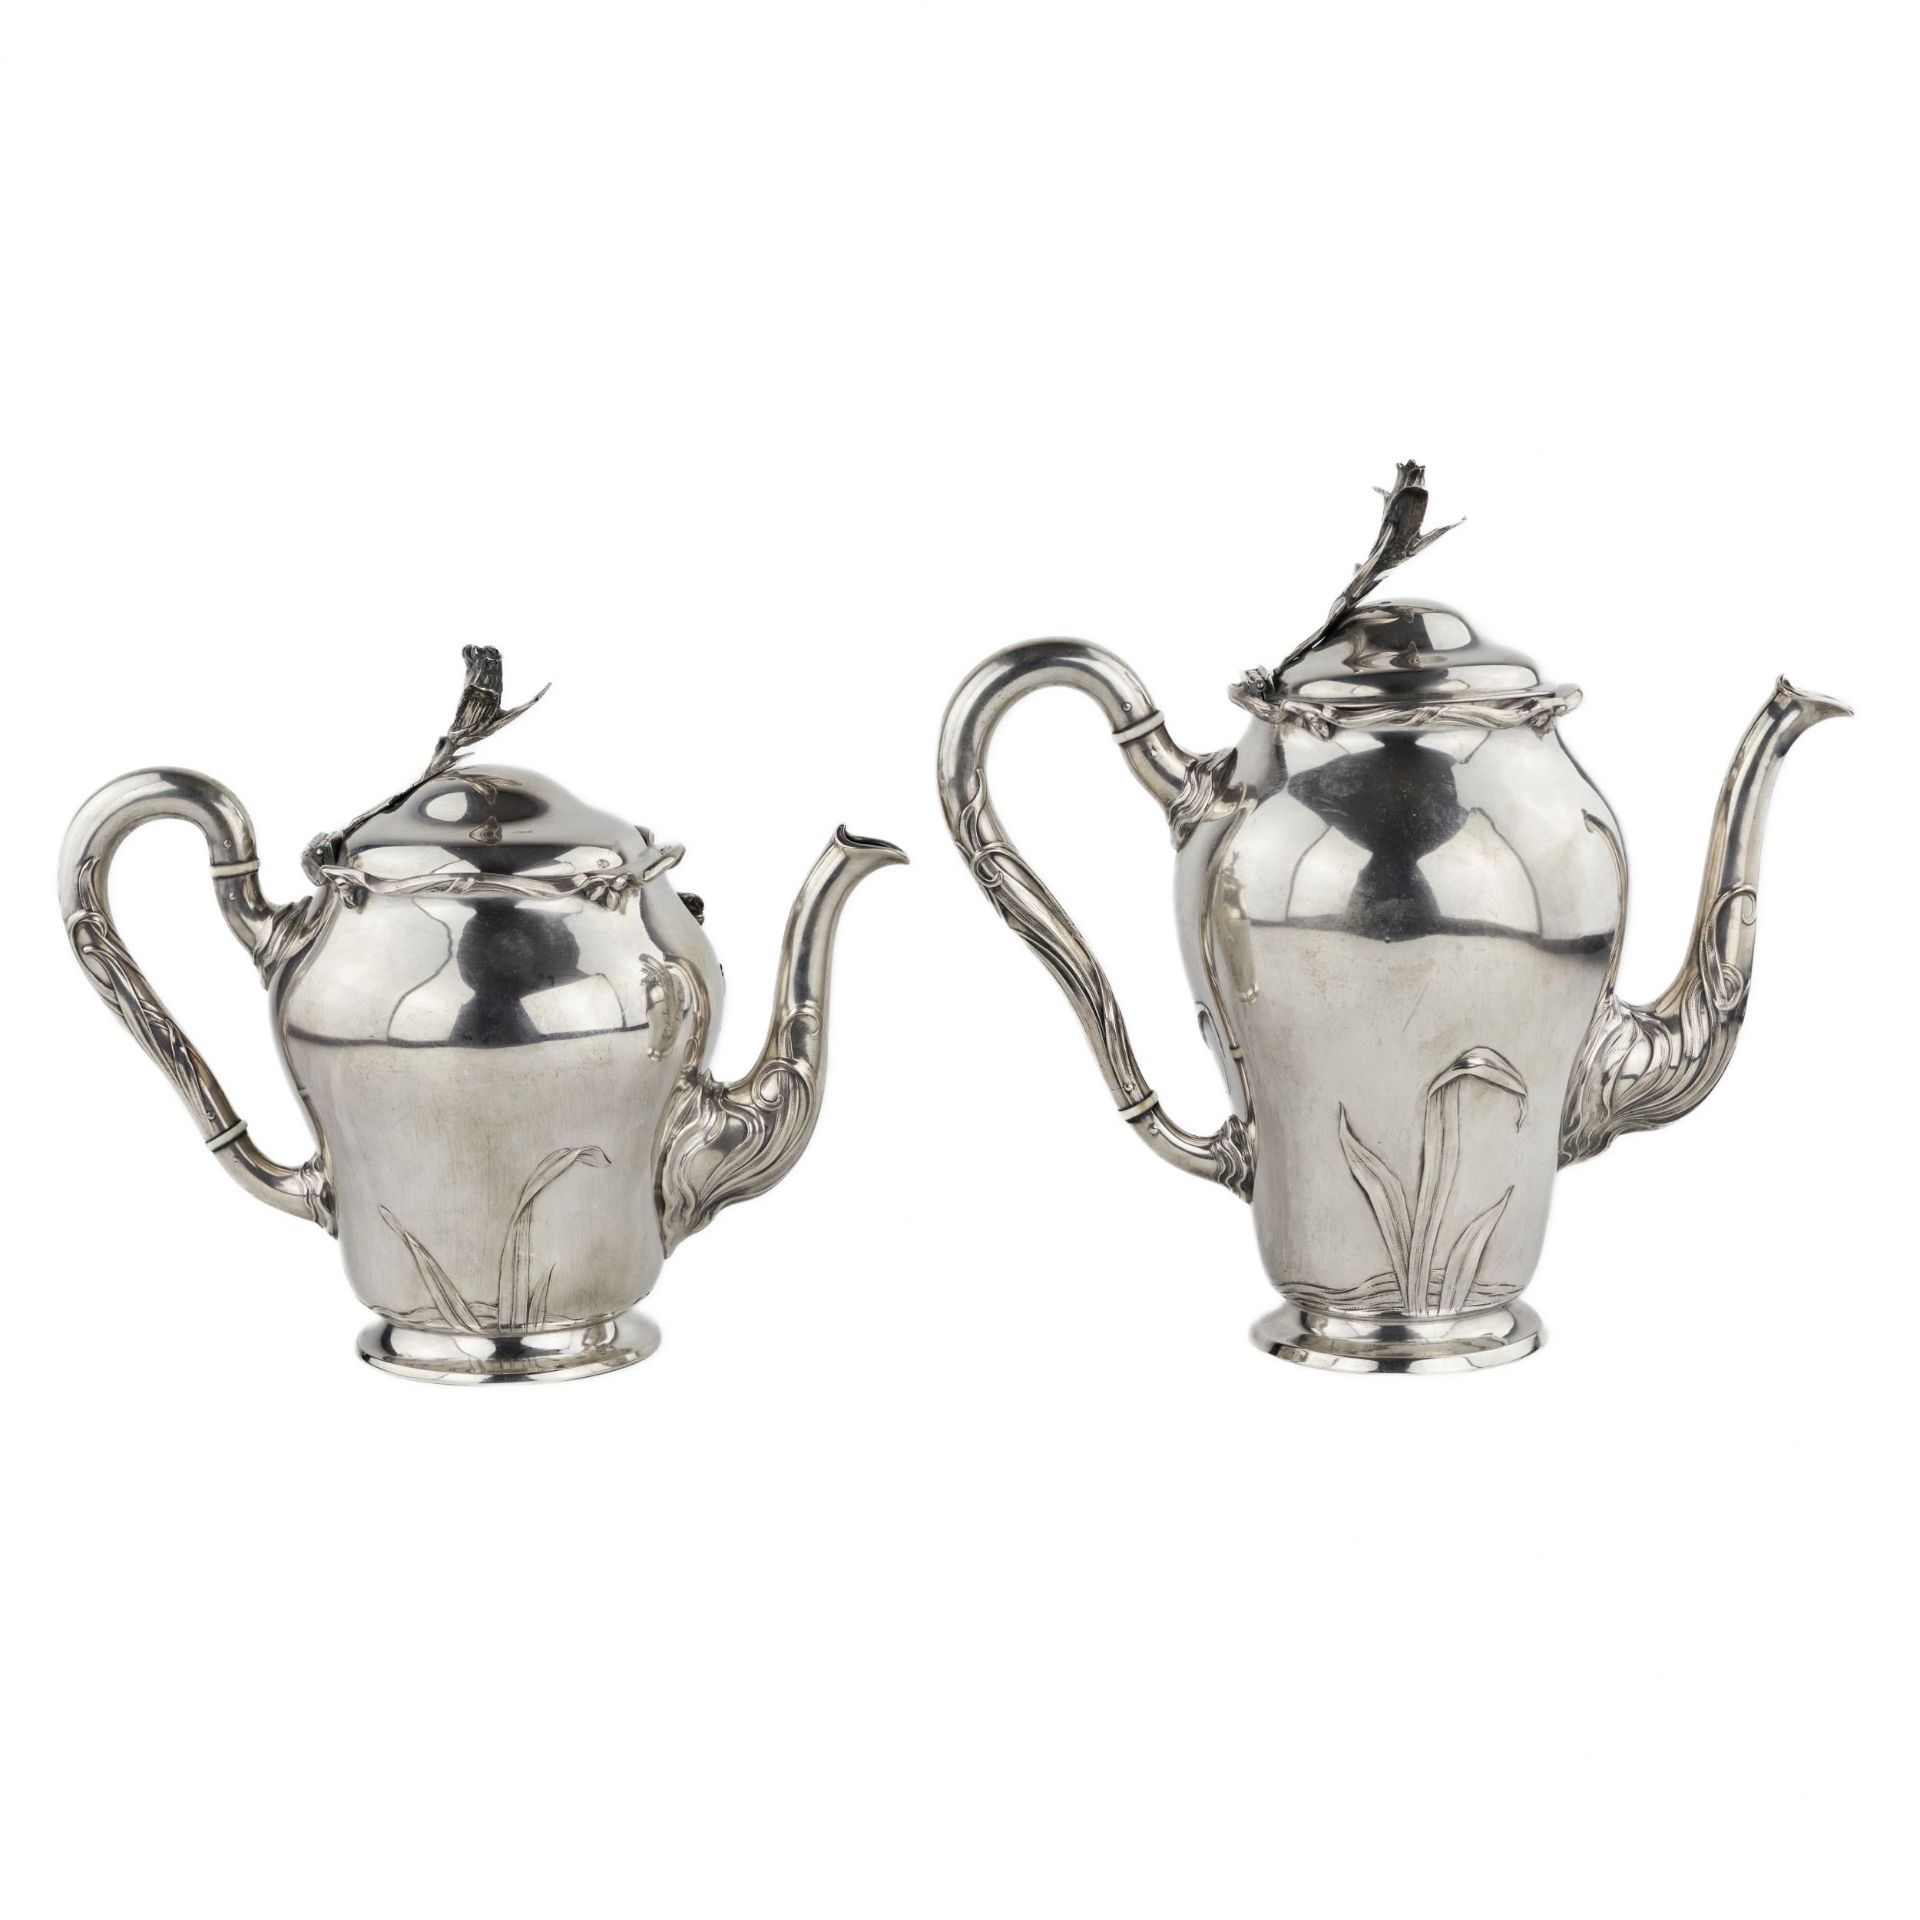 Silver tea and coffee service in Art Nouveau style. Bruckmann. After 1888. - Image 6 of 13